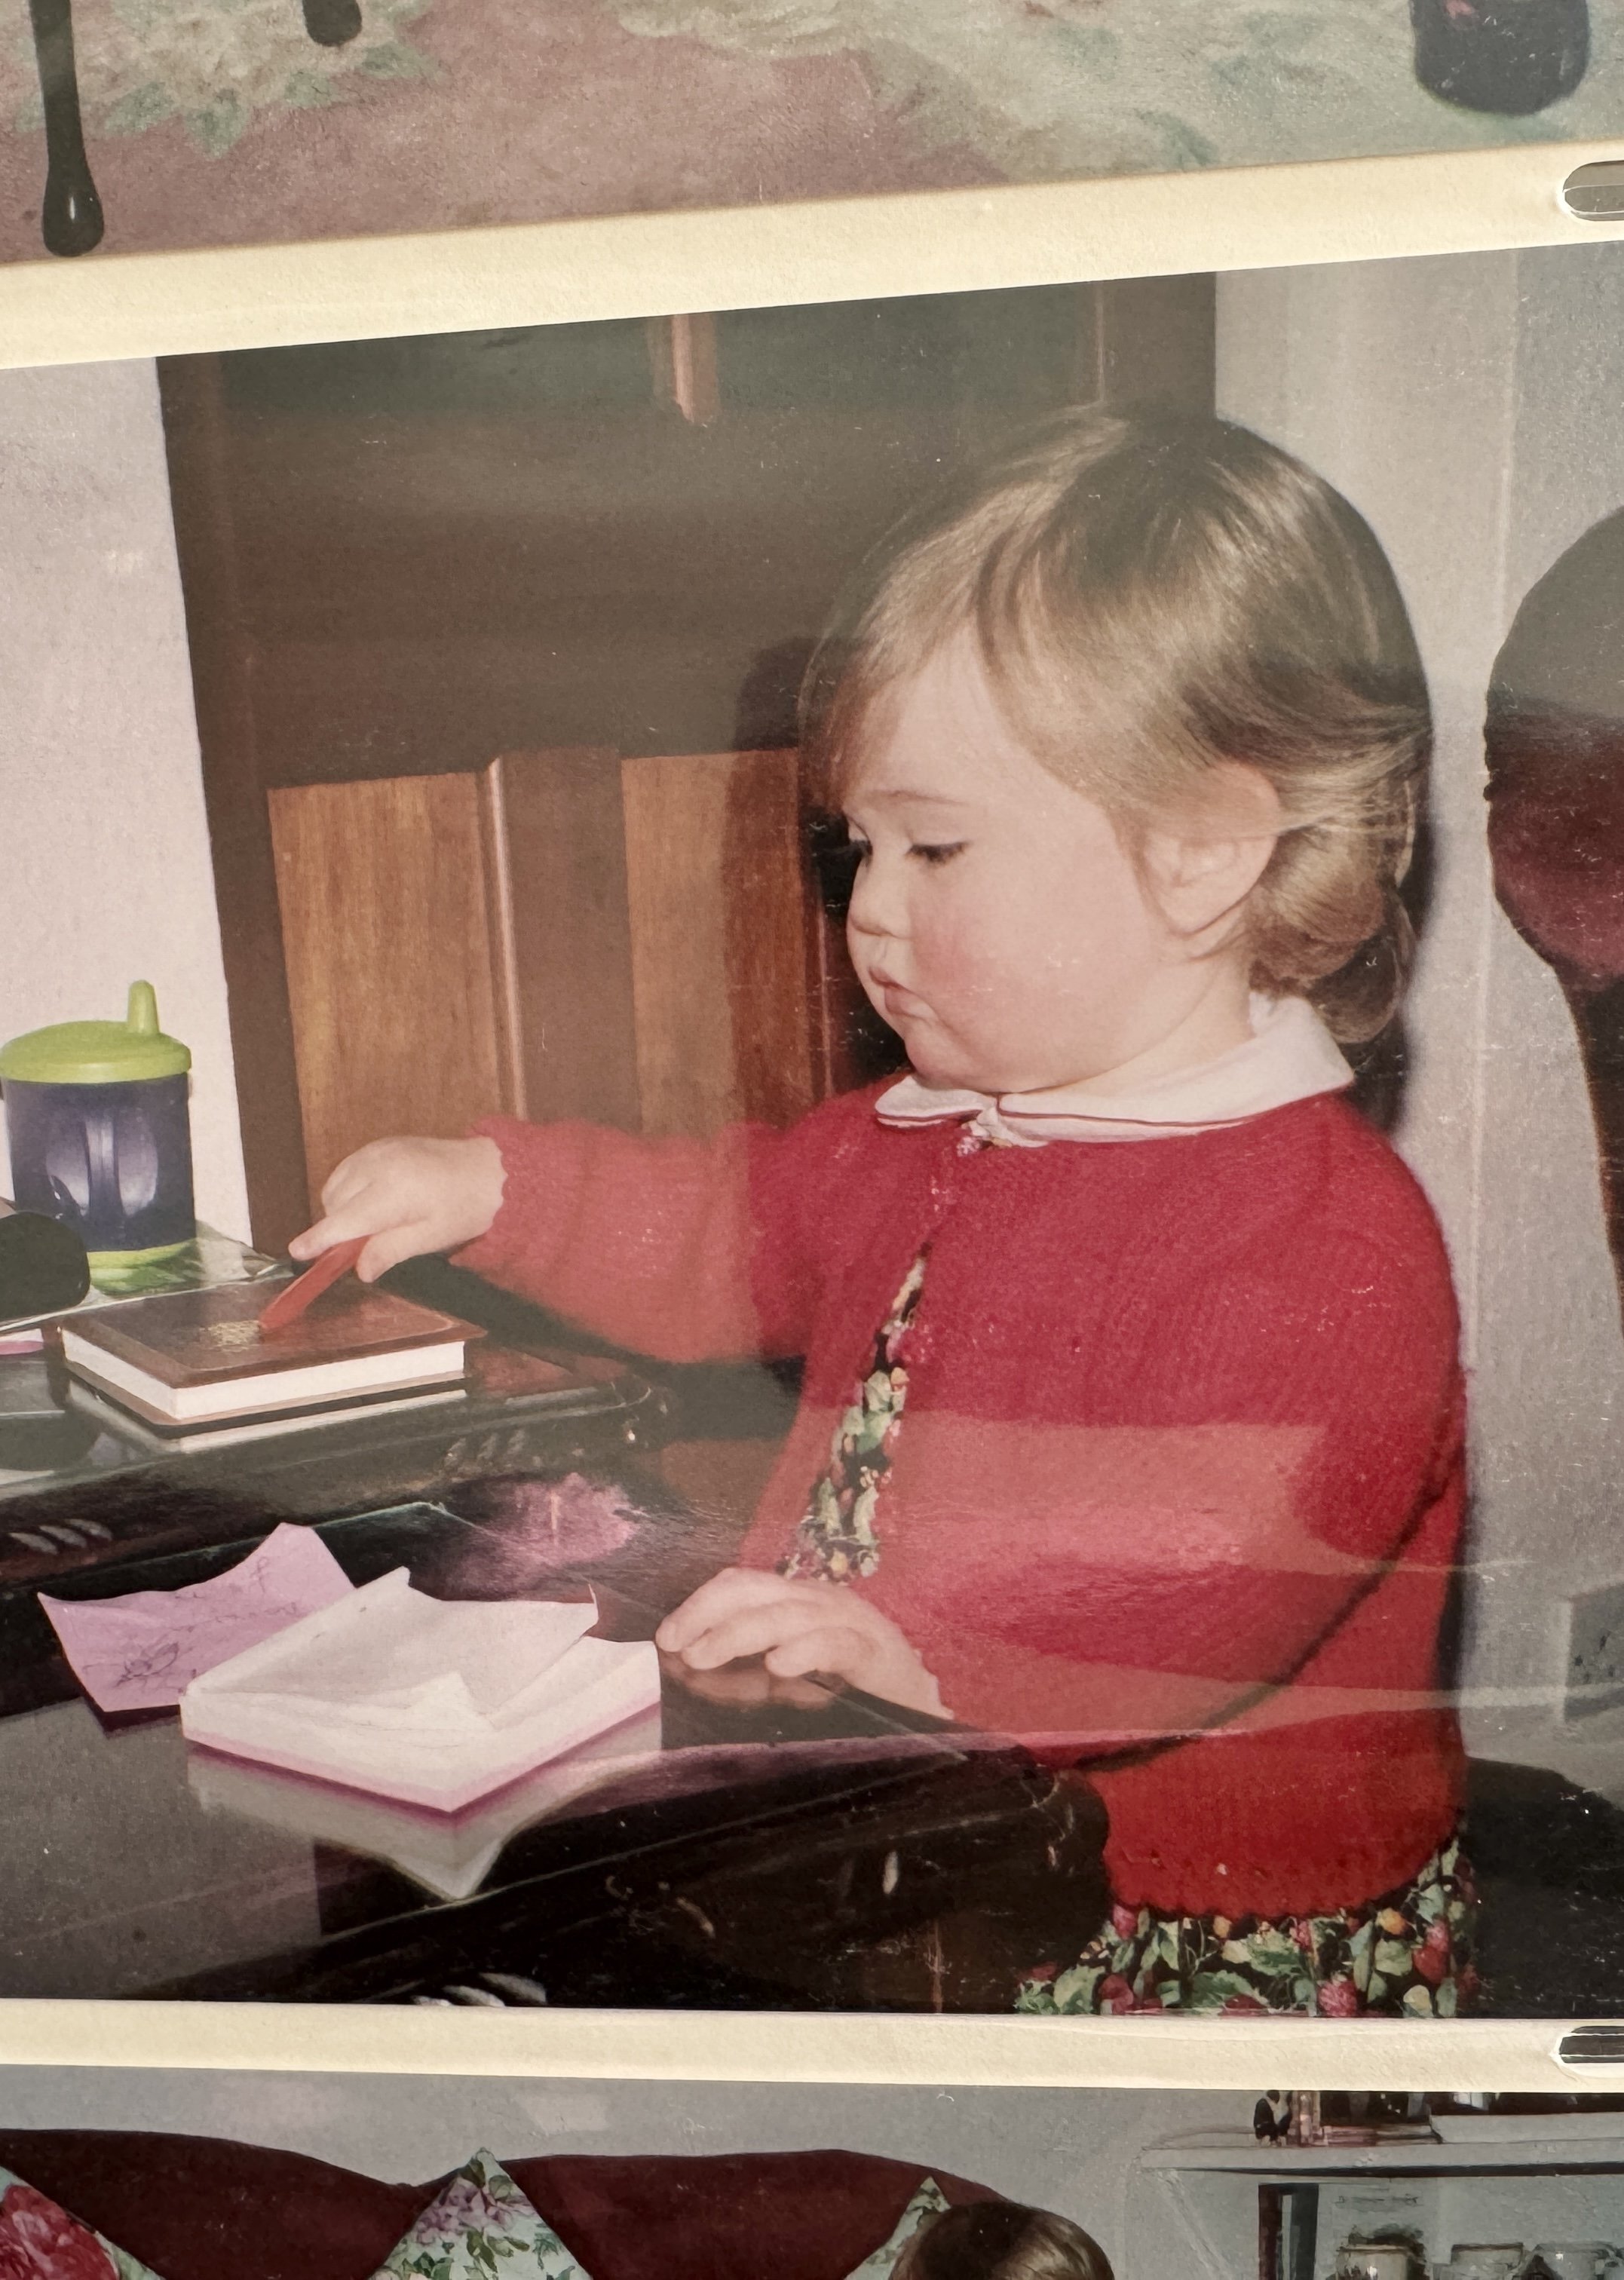 Little me practicing my writing!